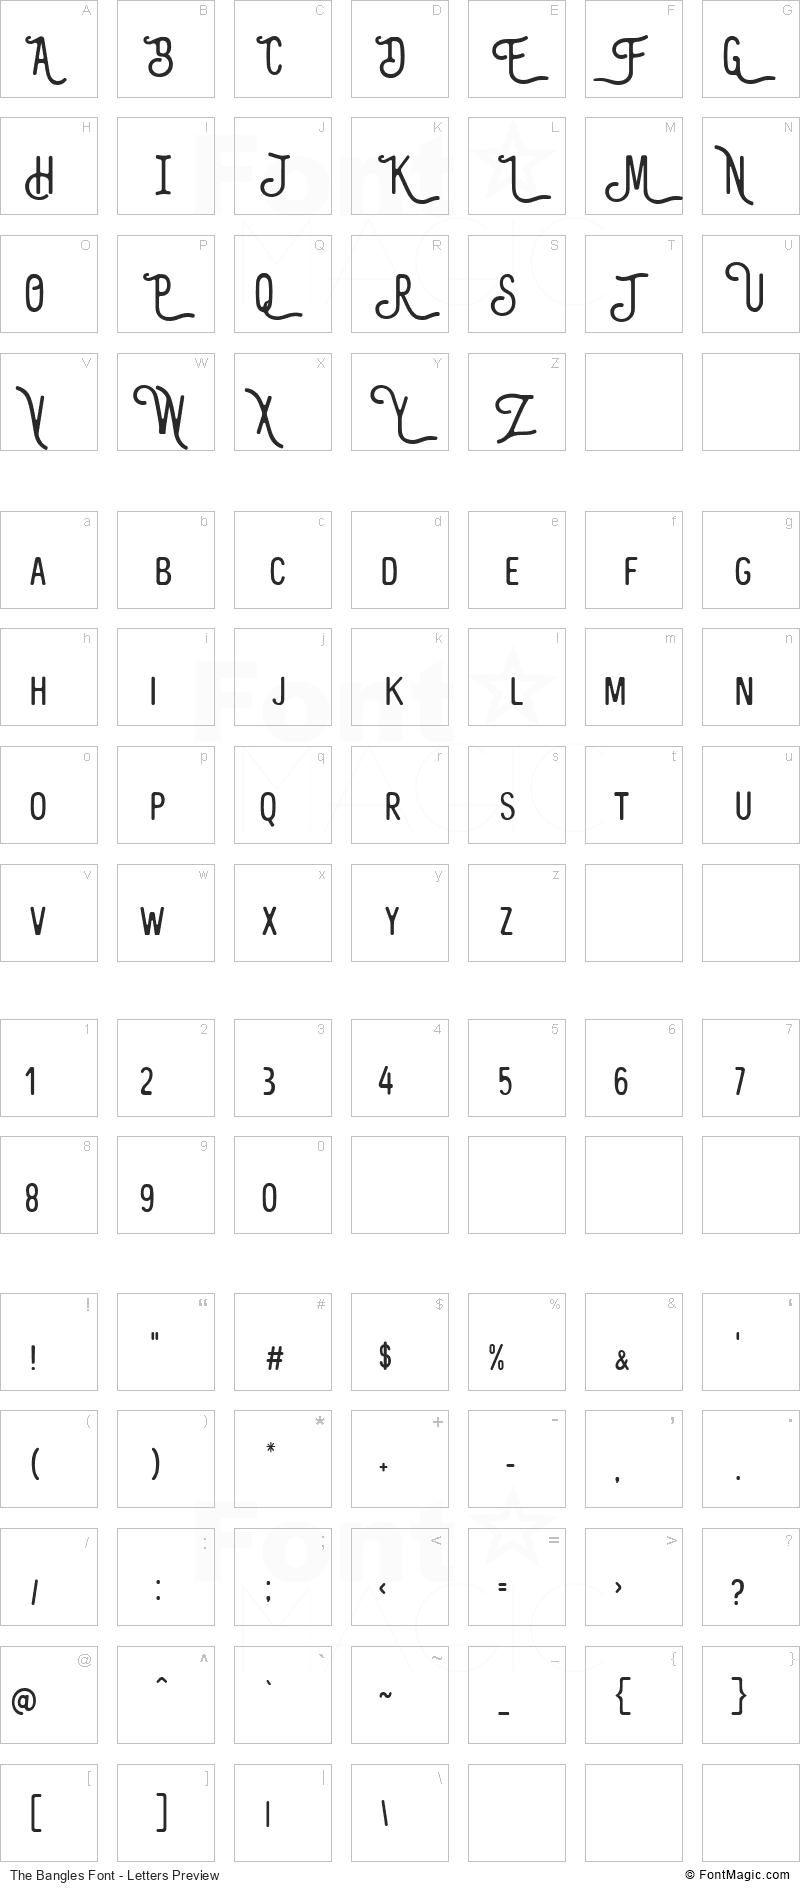 The Bangles Font - All Latters Preview Chart